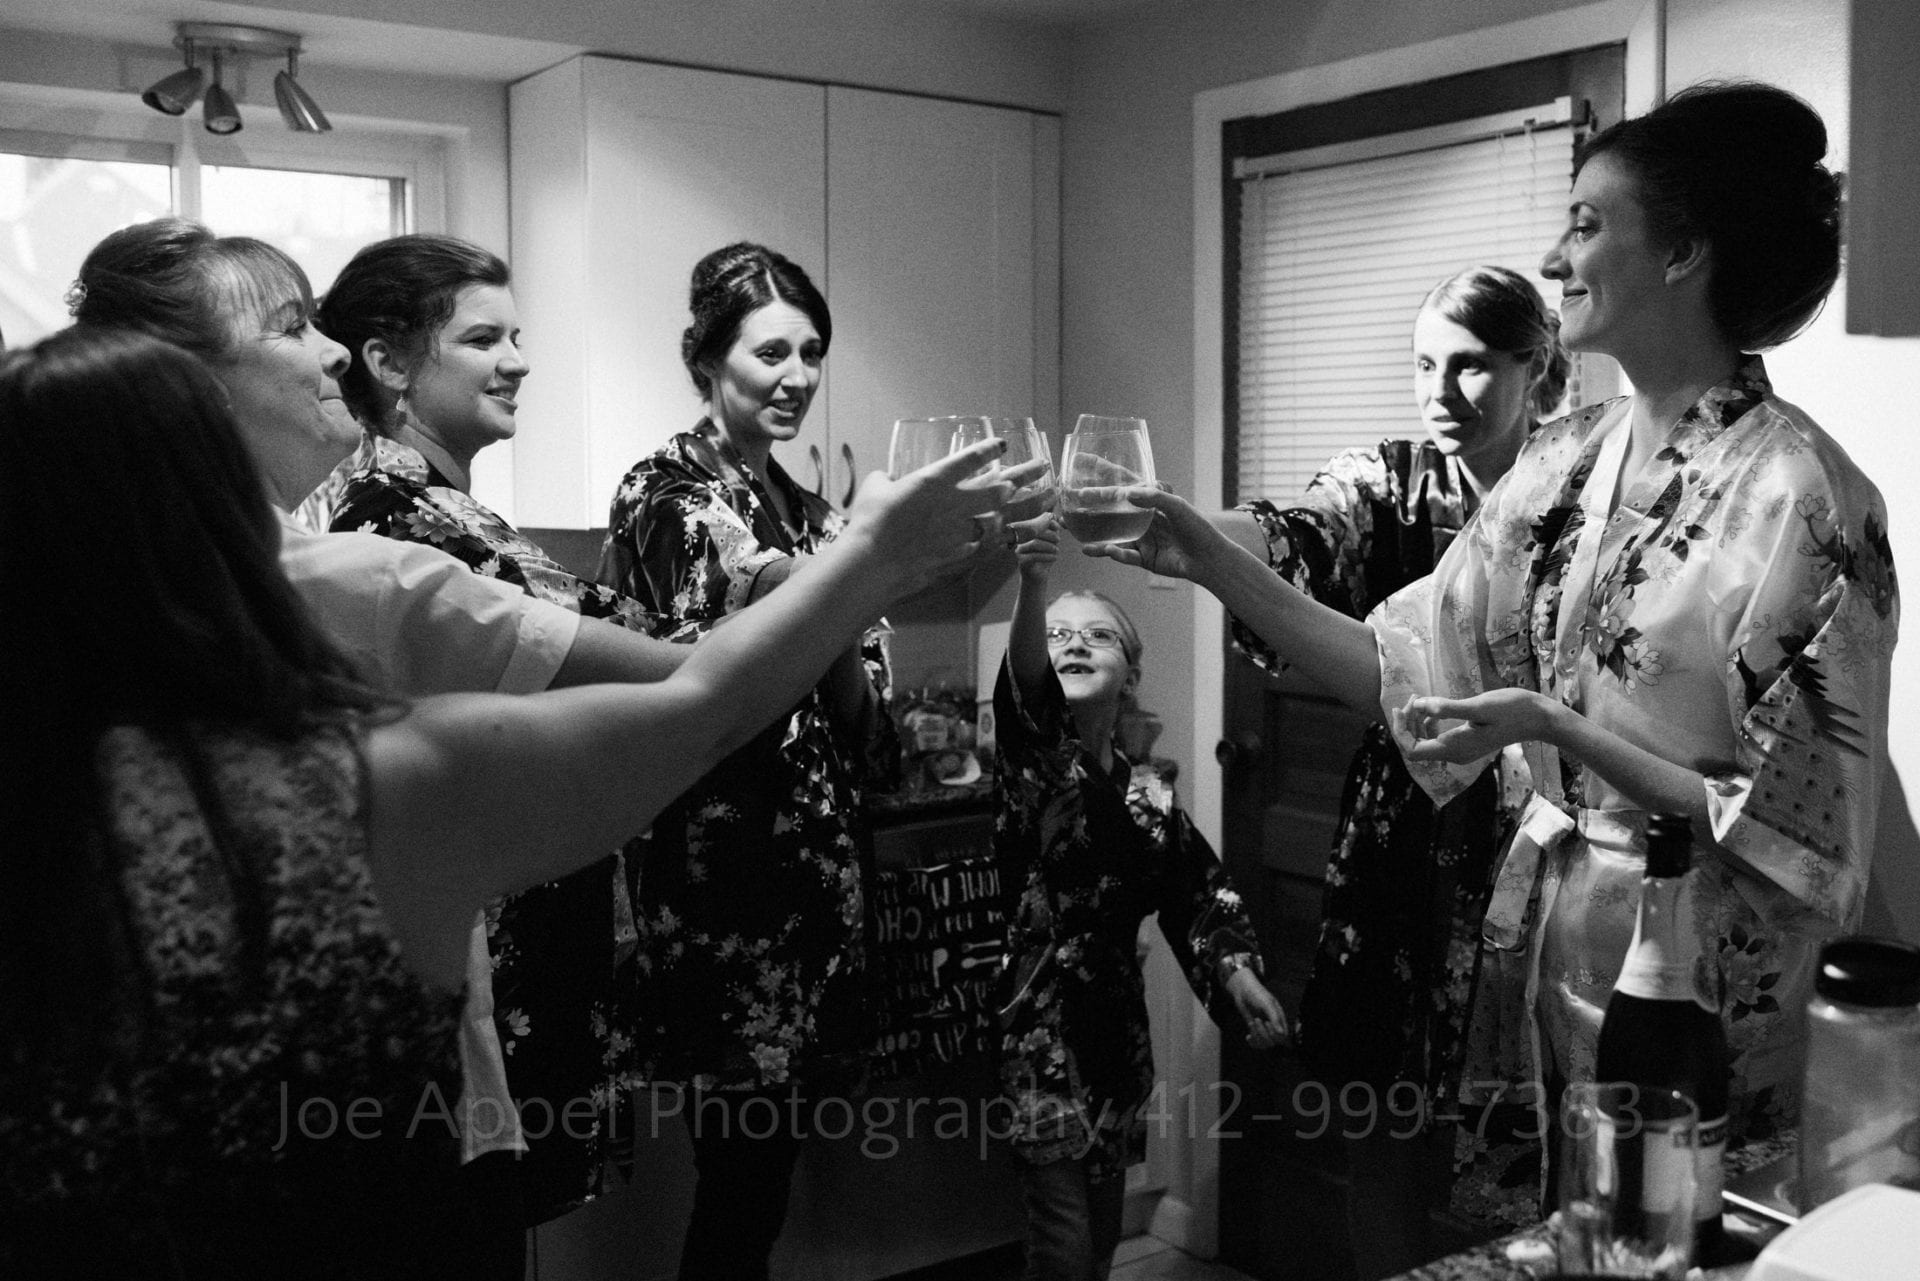 A bride and her bridesmaids touch glasses as they toast each other in a crowded kitchen.